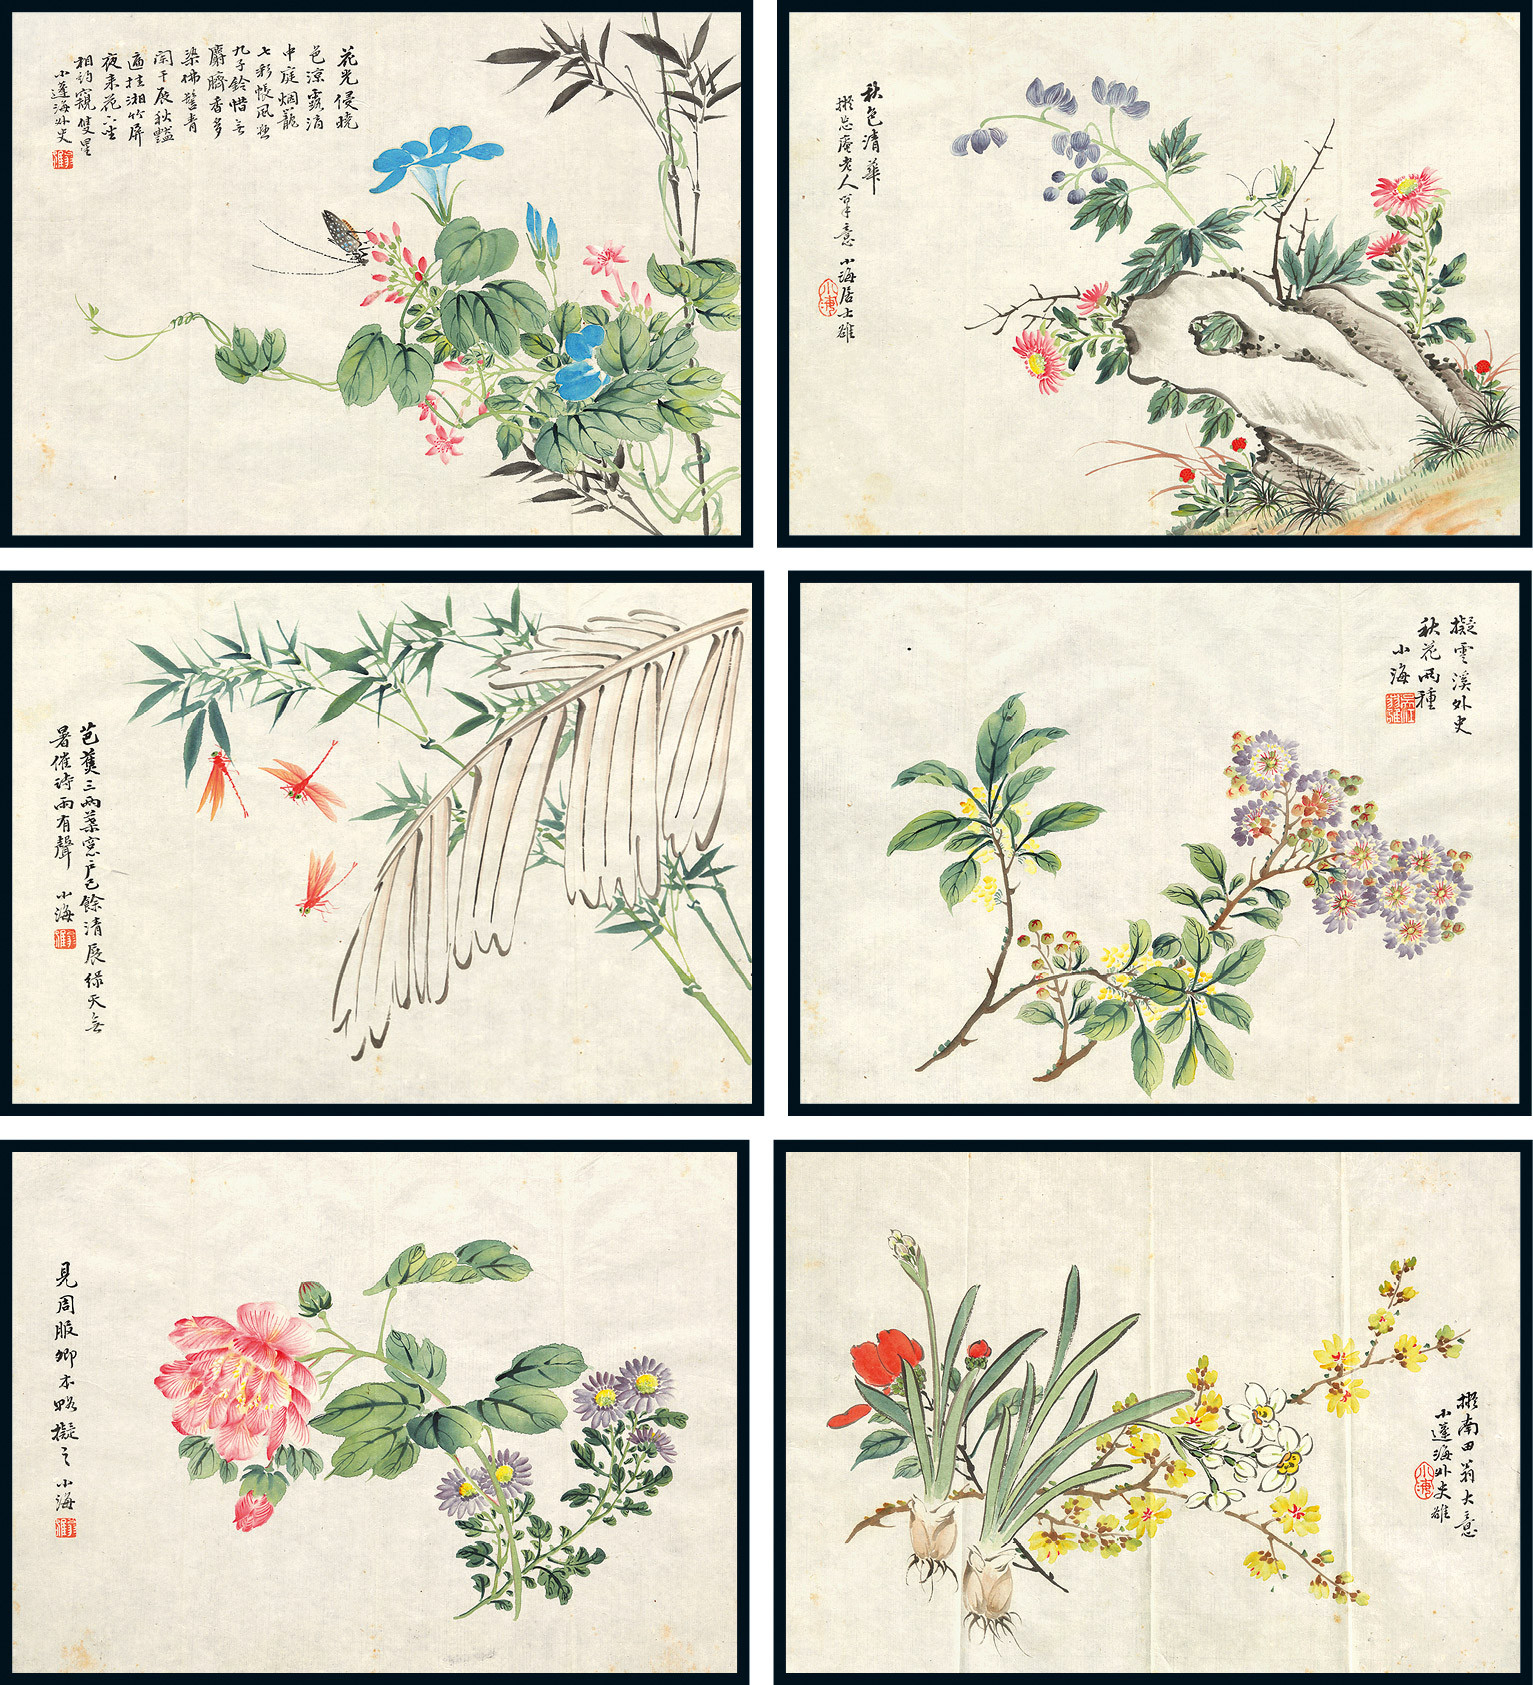 A set of 6 paintings drawn by Weng Xiaohai